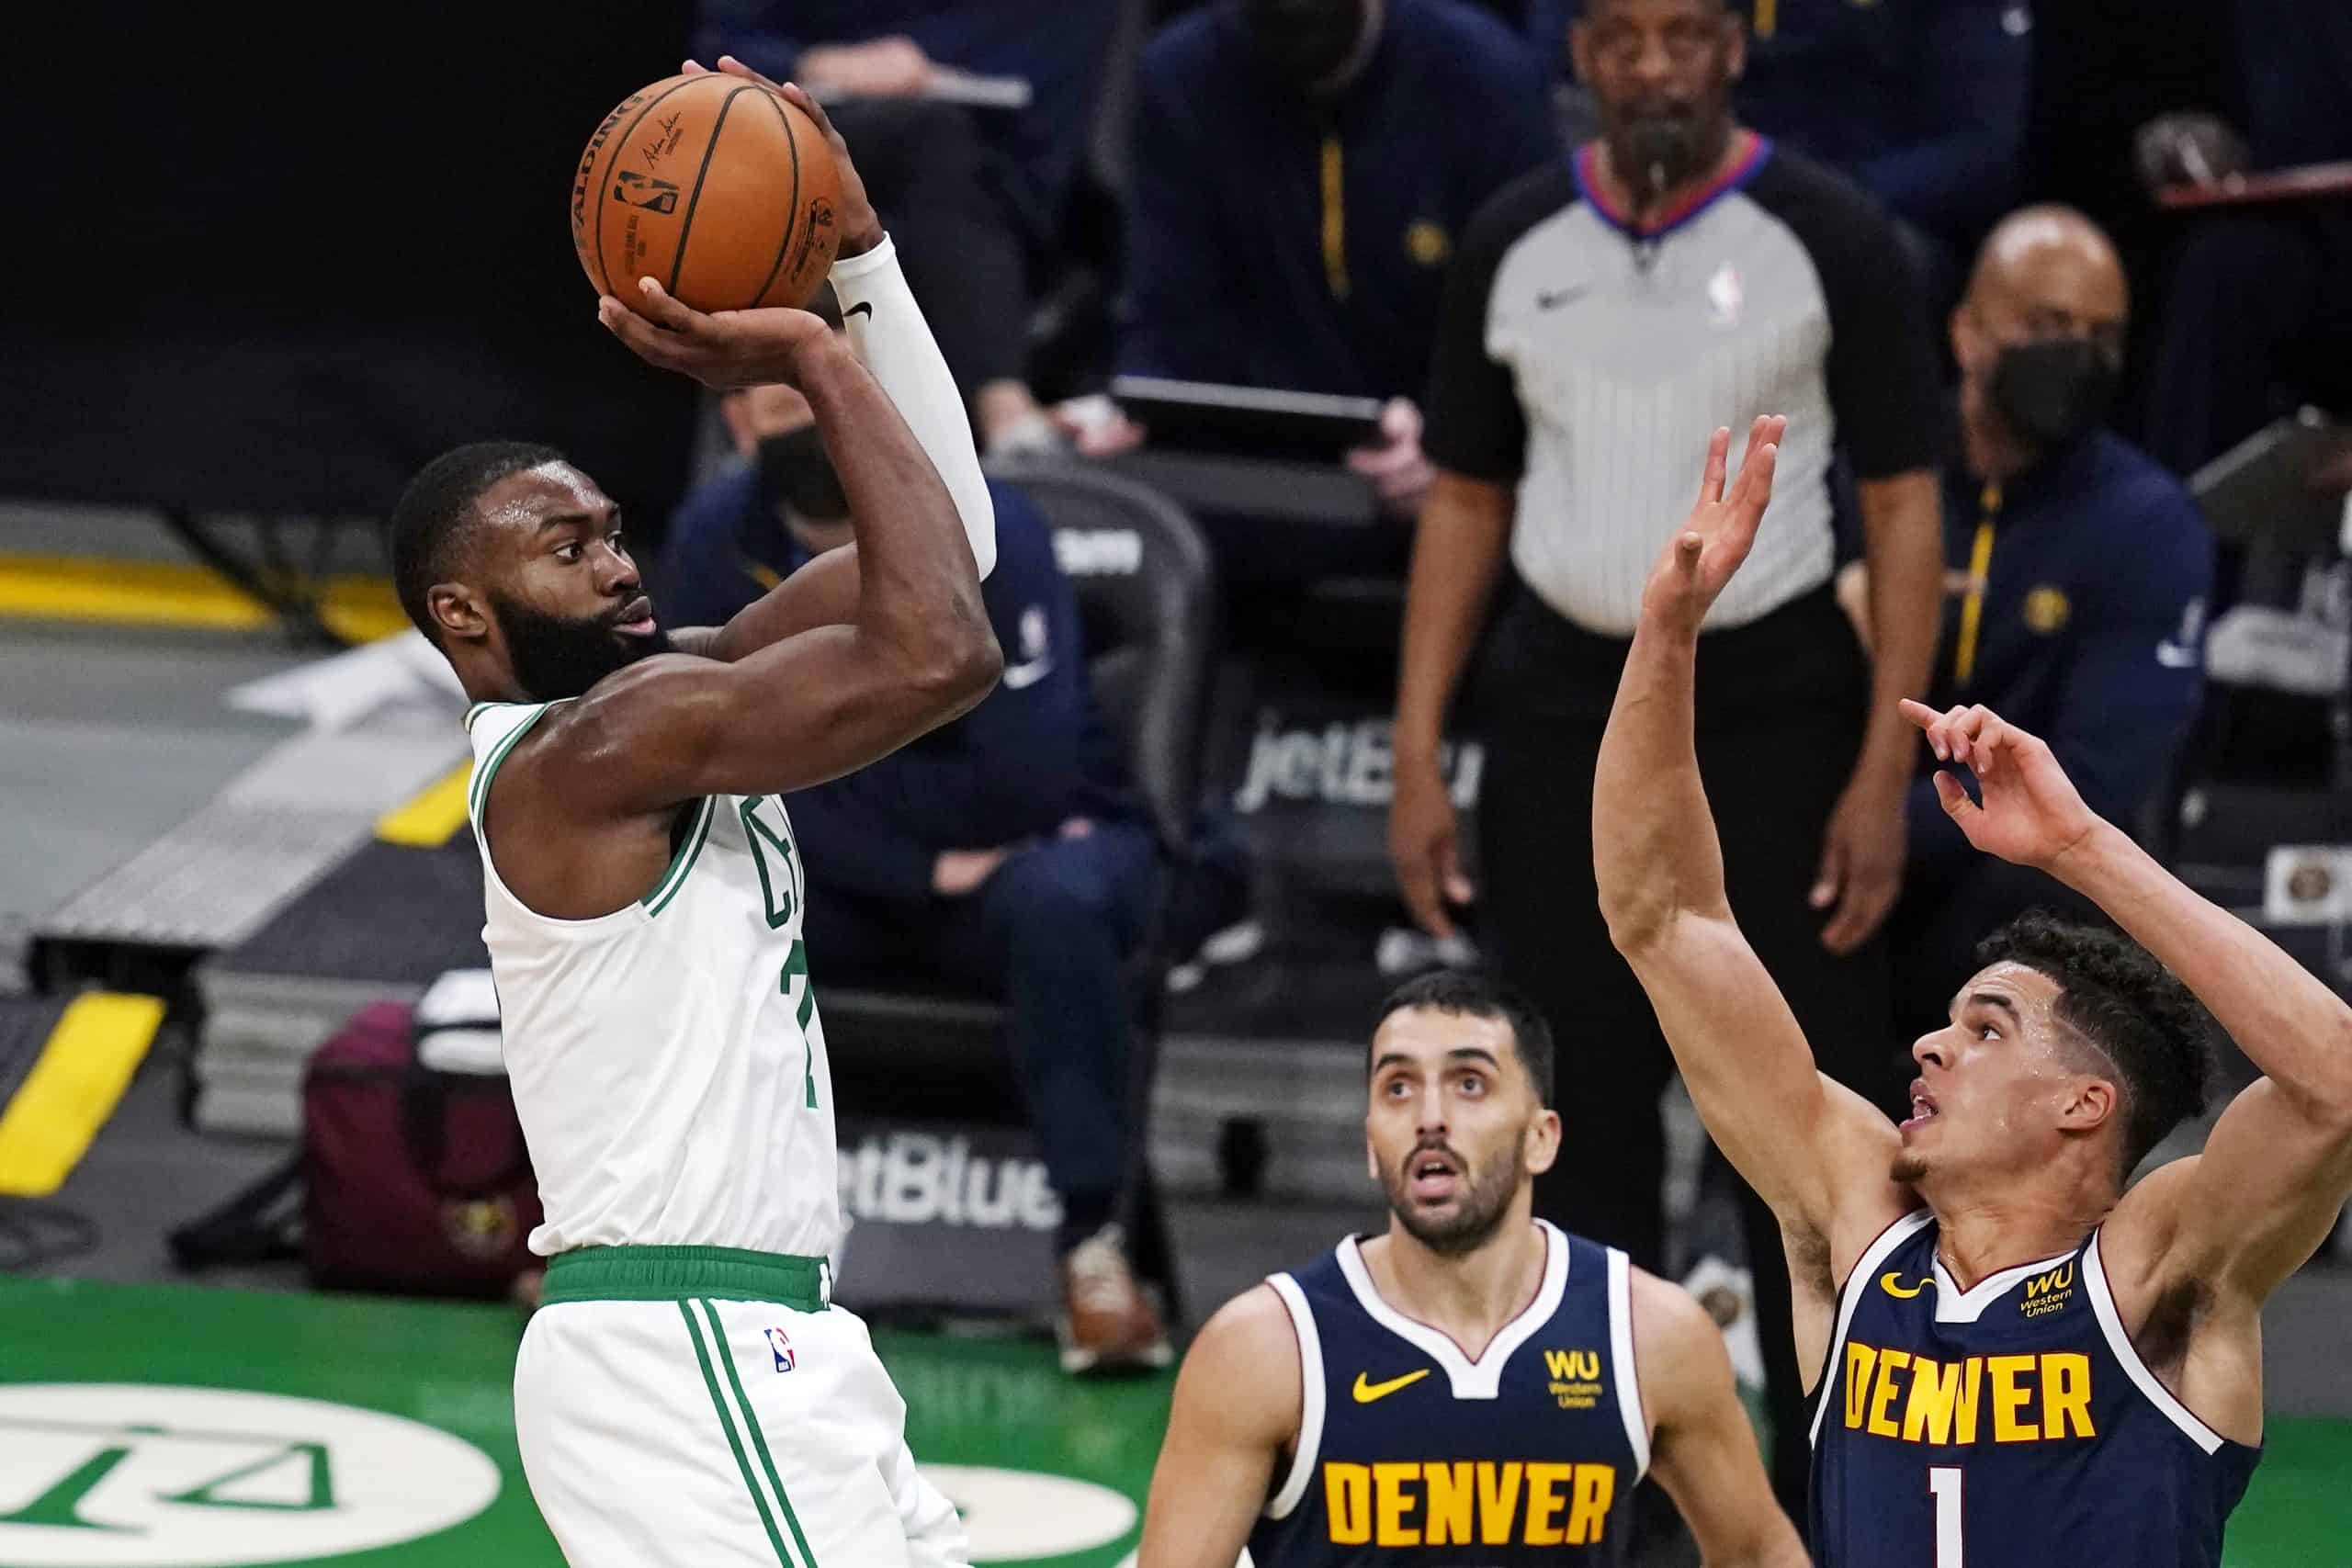 February 11th Nuggets at Celtics betting